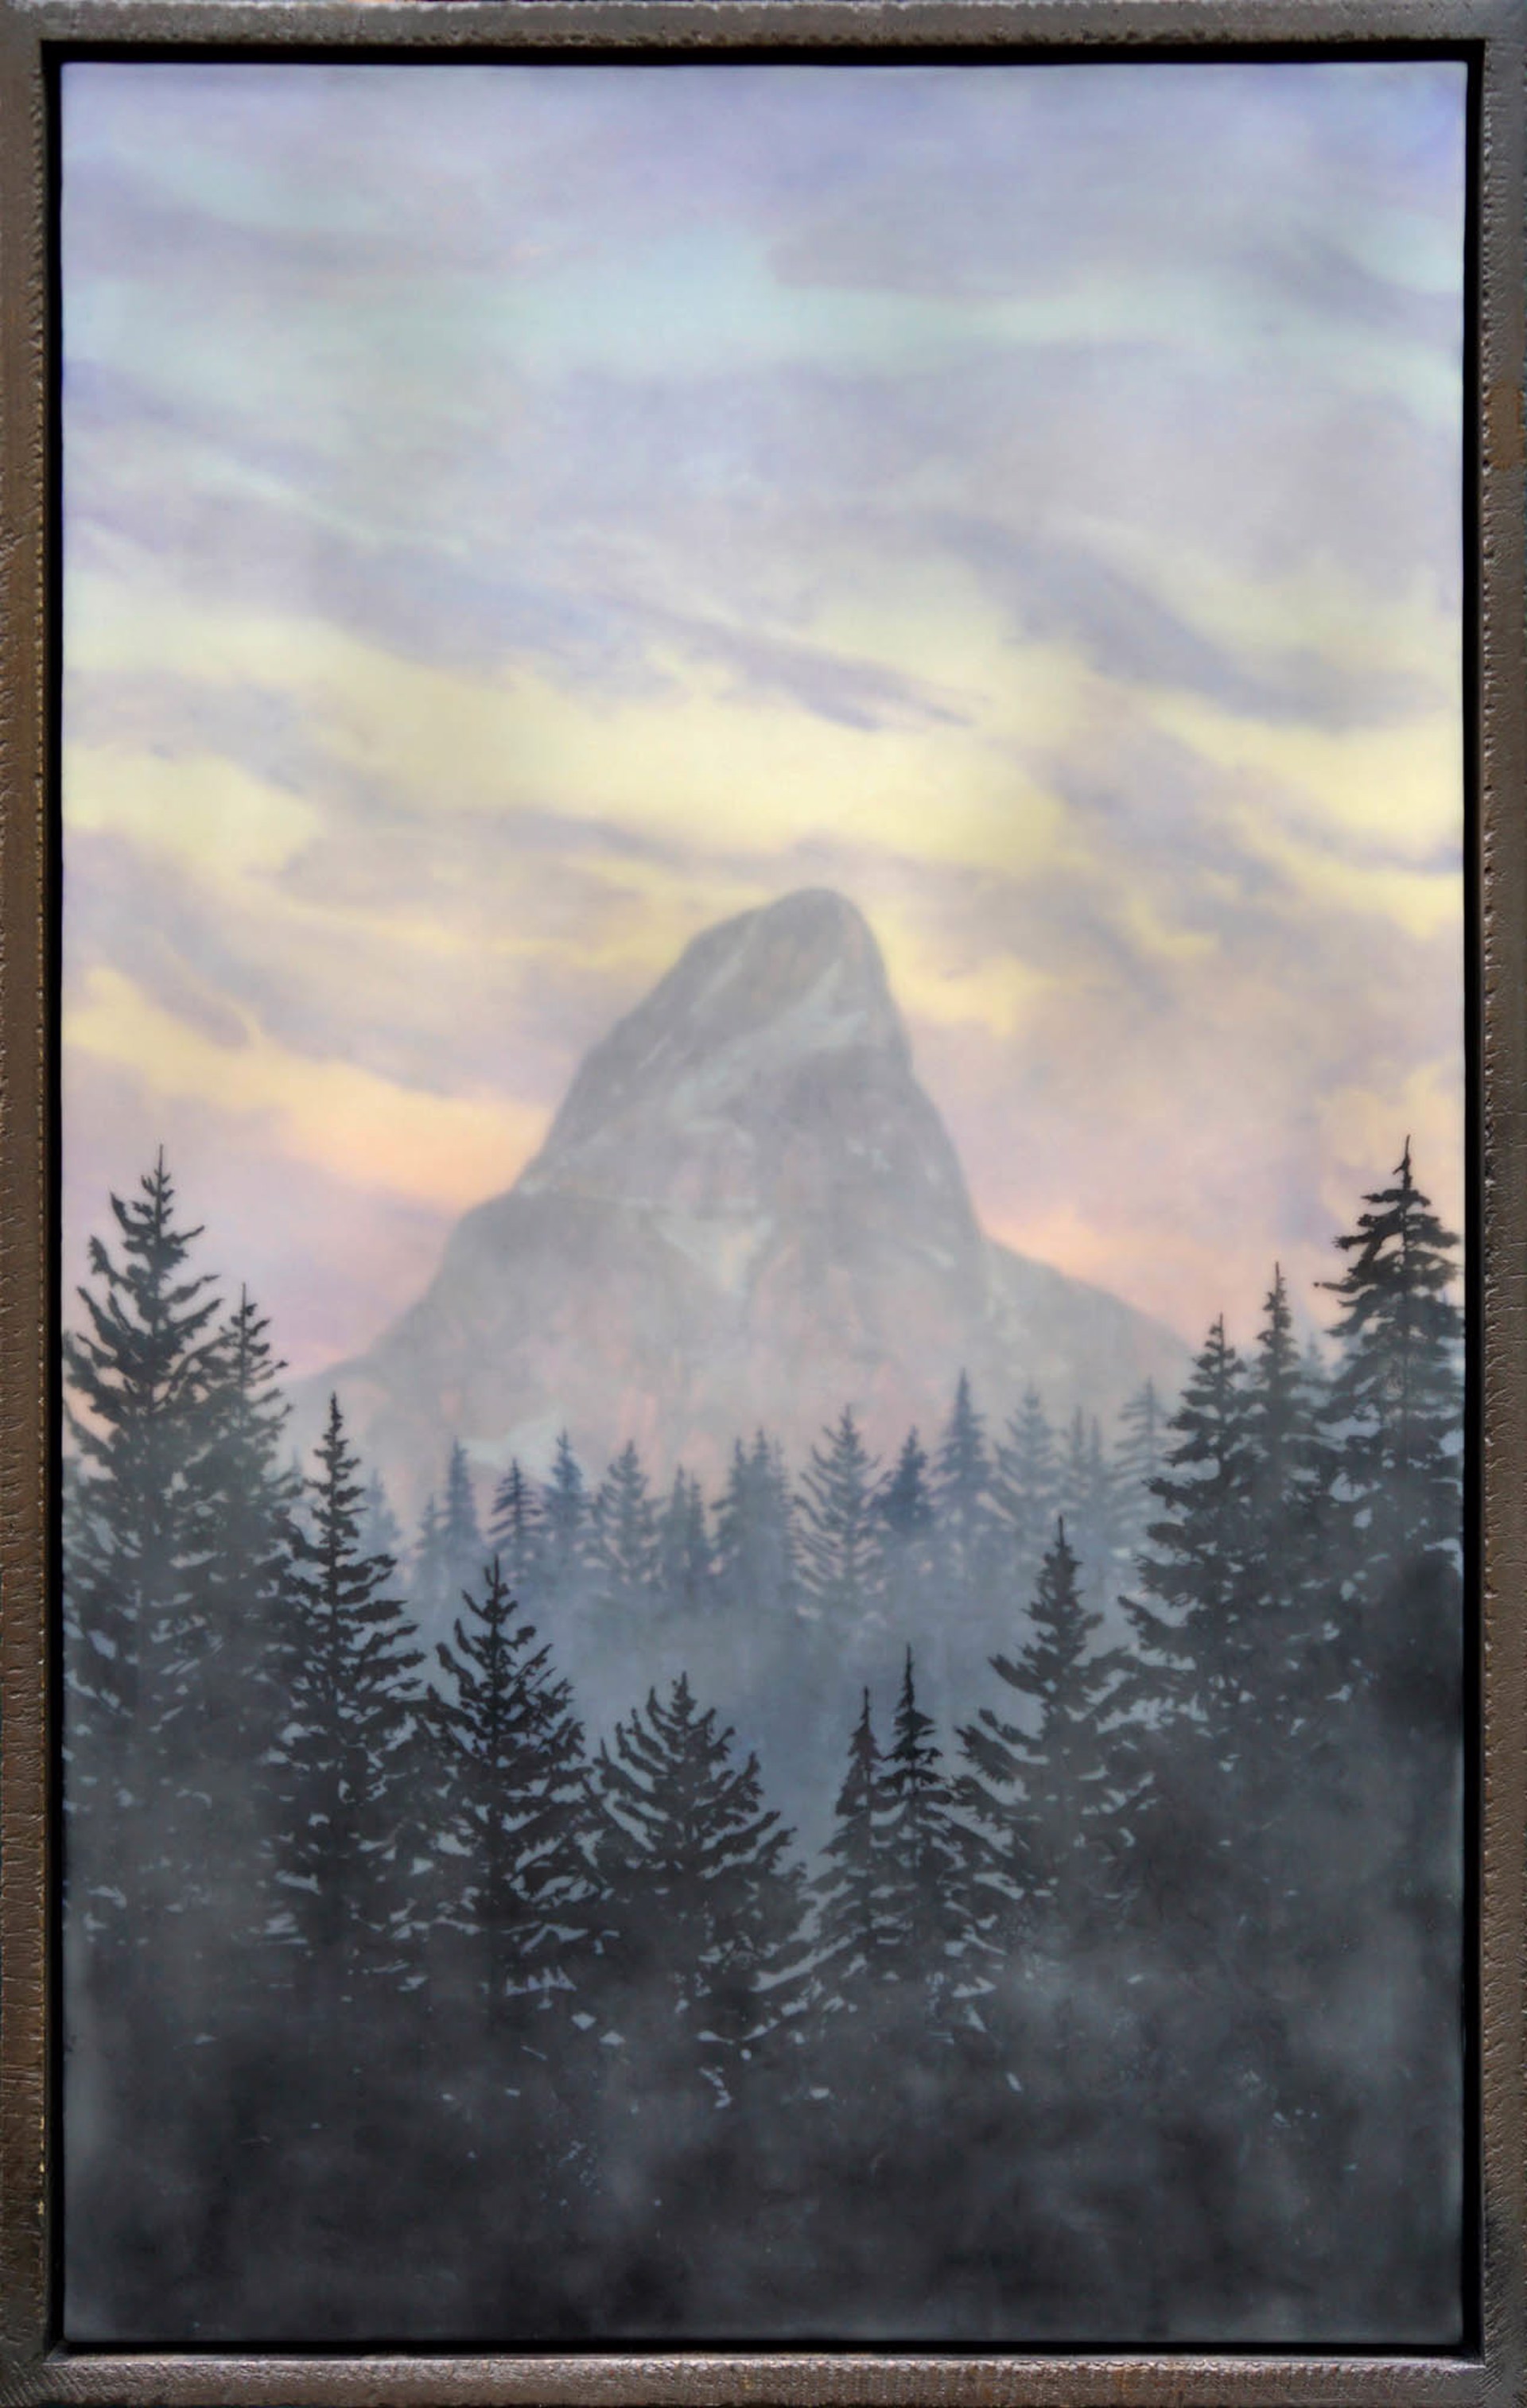 Original Landscape Painting Featuring A Mountain Peak Against Sunset Sky With Pine Tree Silhouettes In Foreground